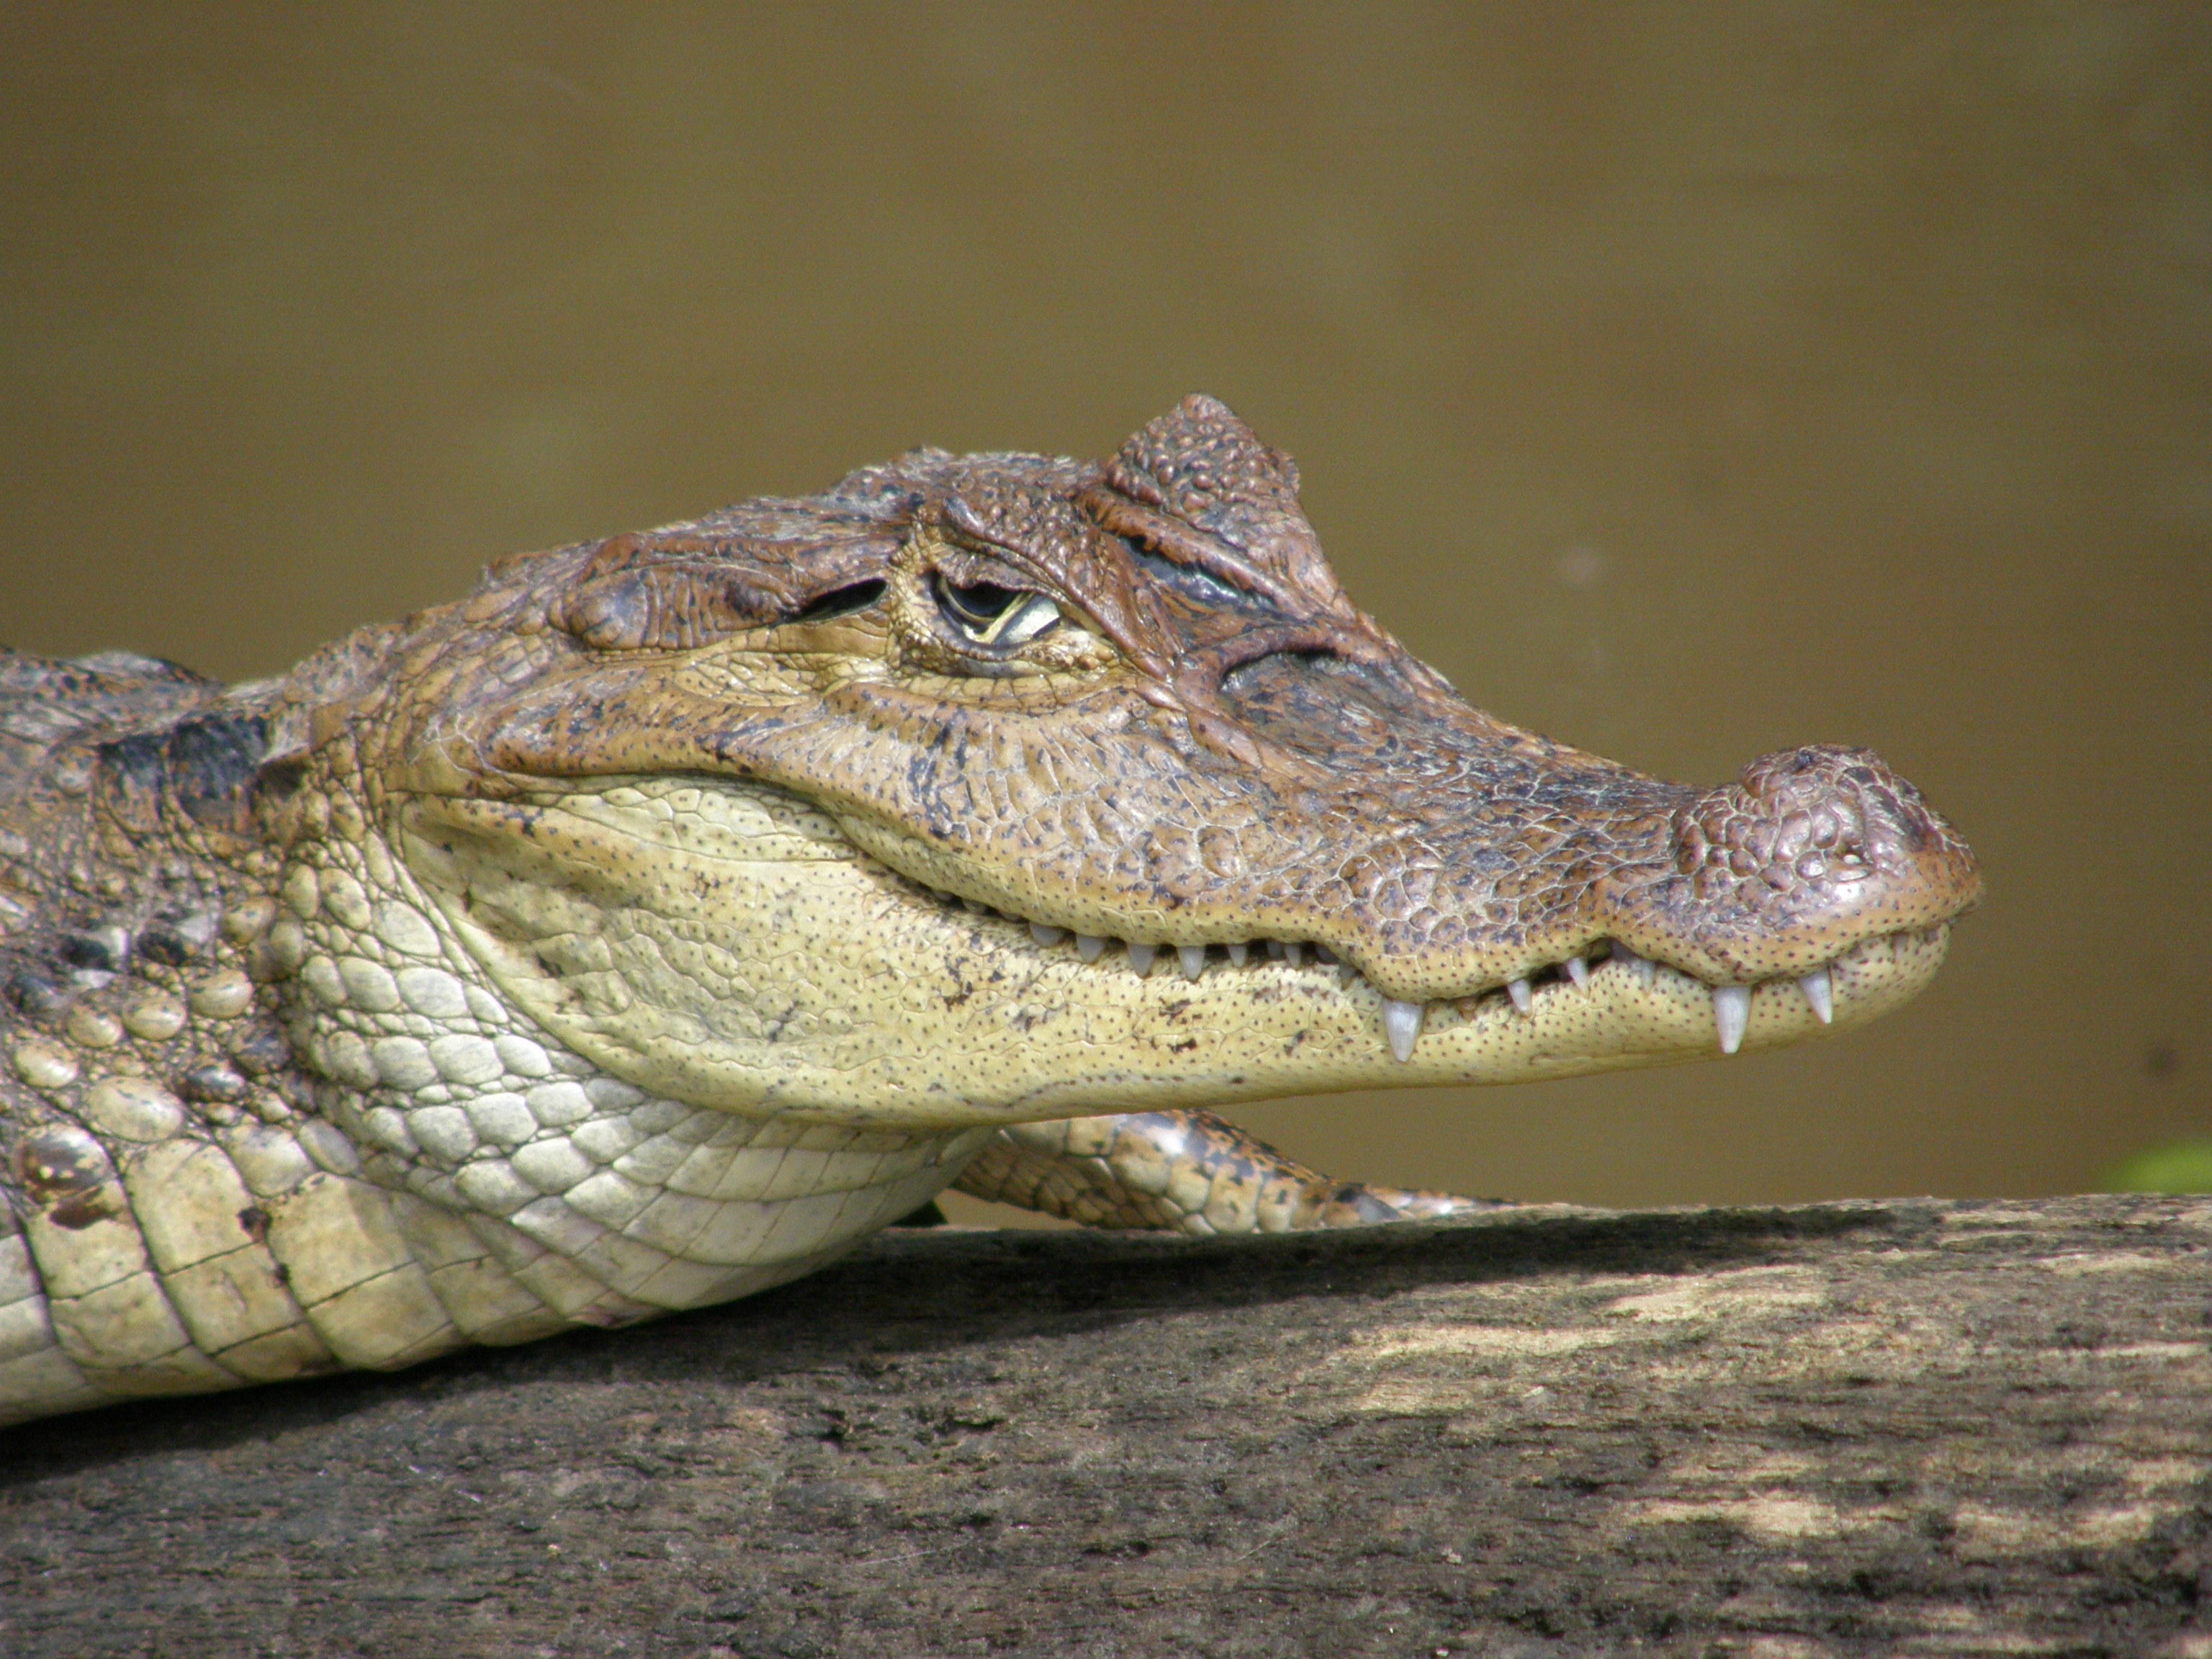 Spectacled caiman (II)